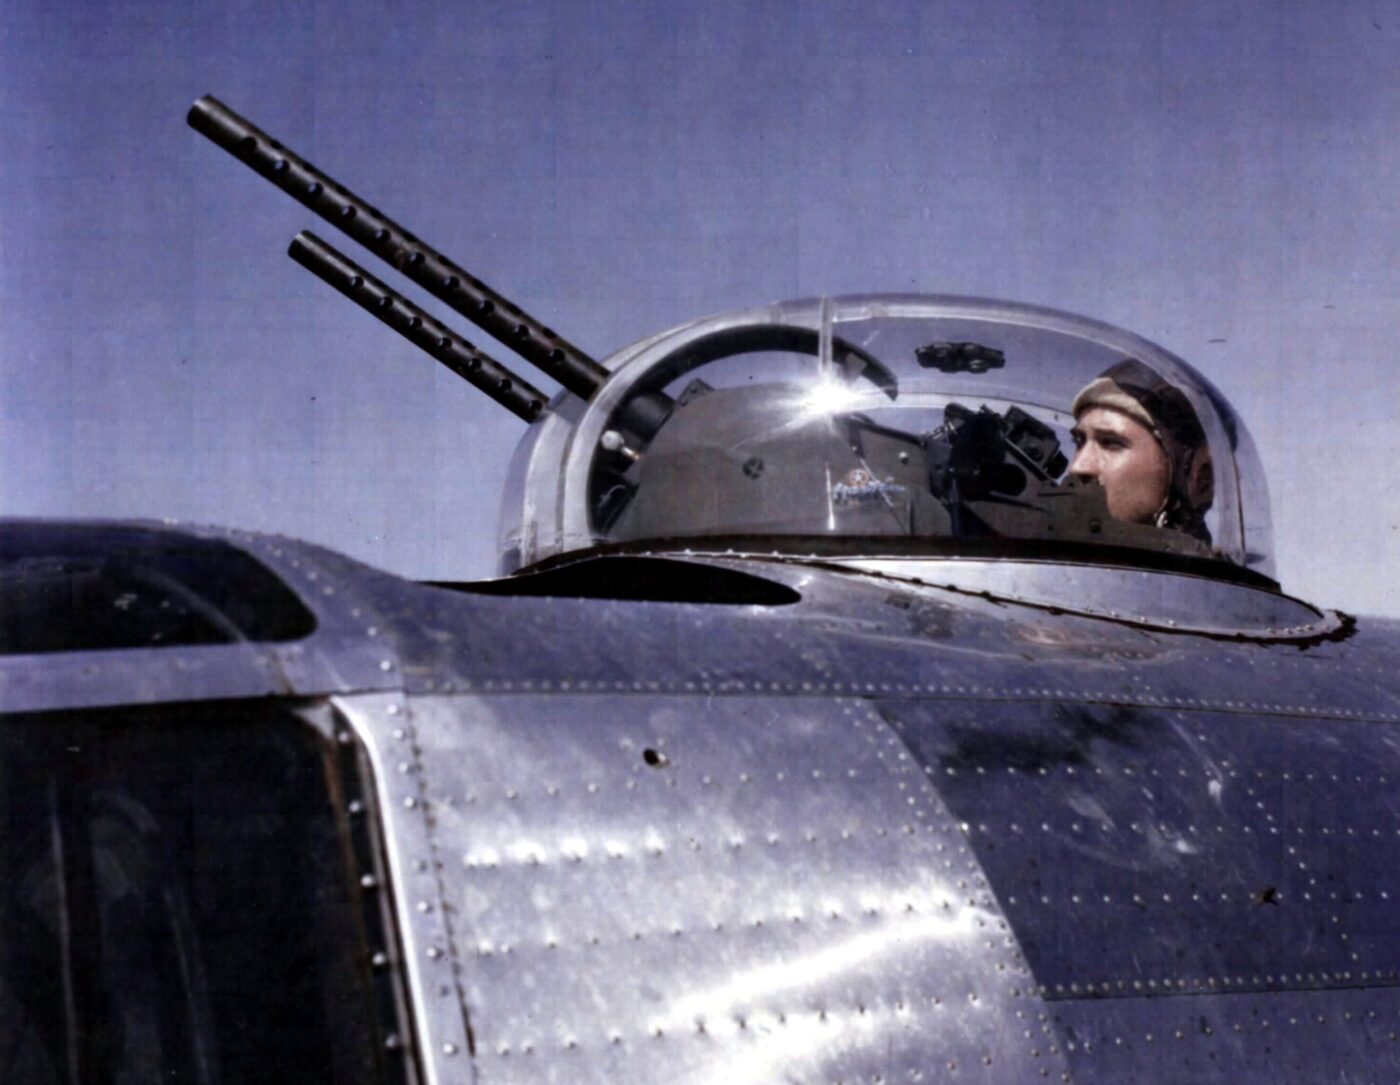 B-24 top turret gunner of the 8th USAF